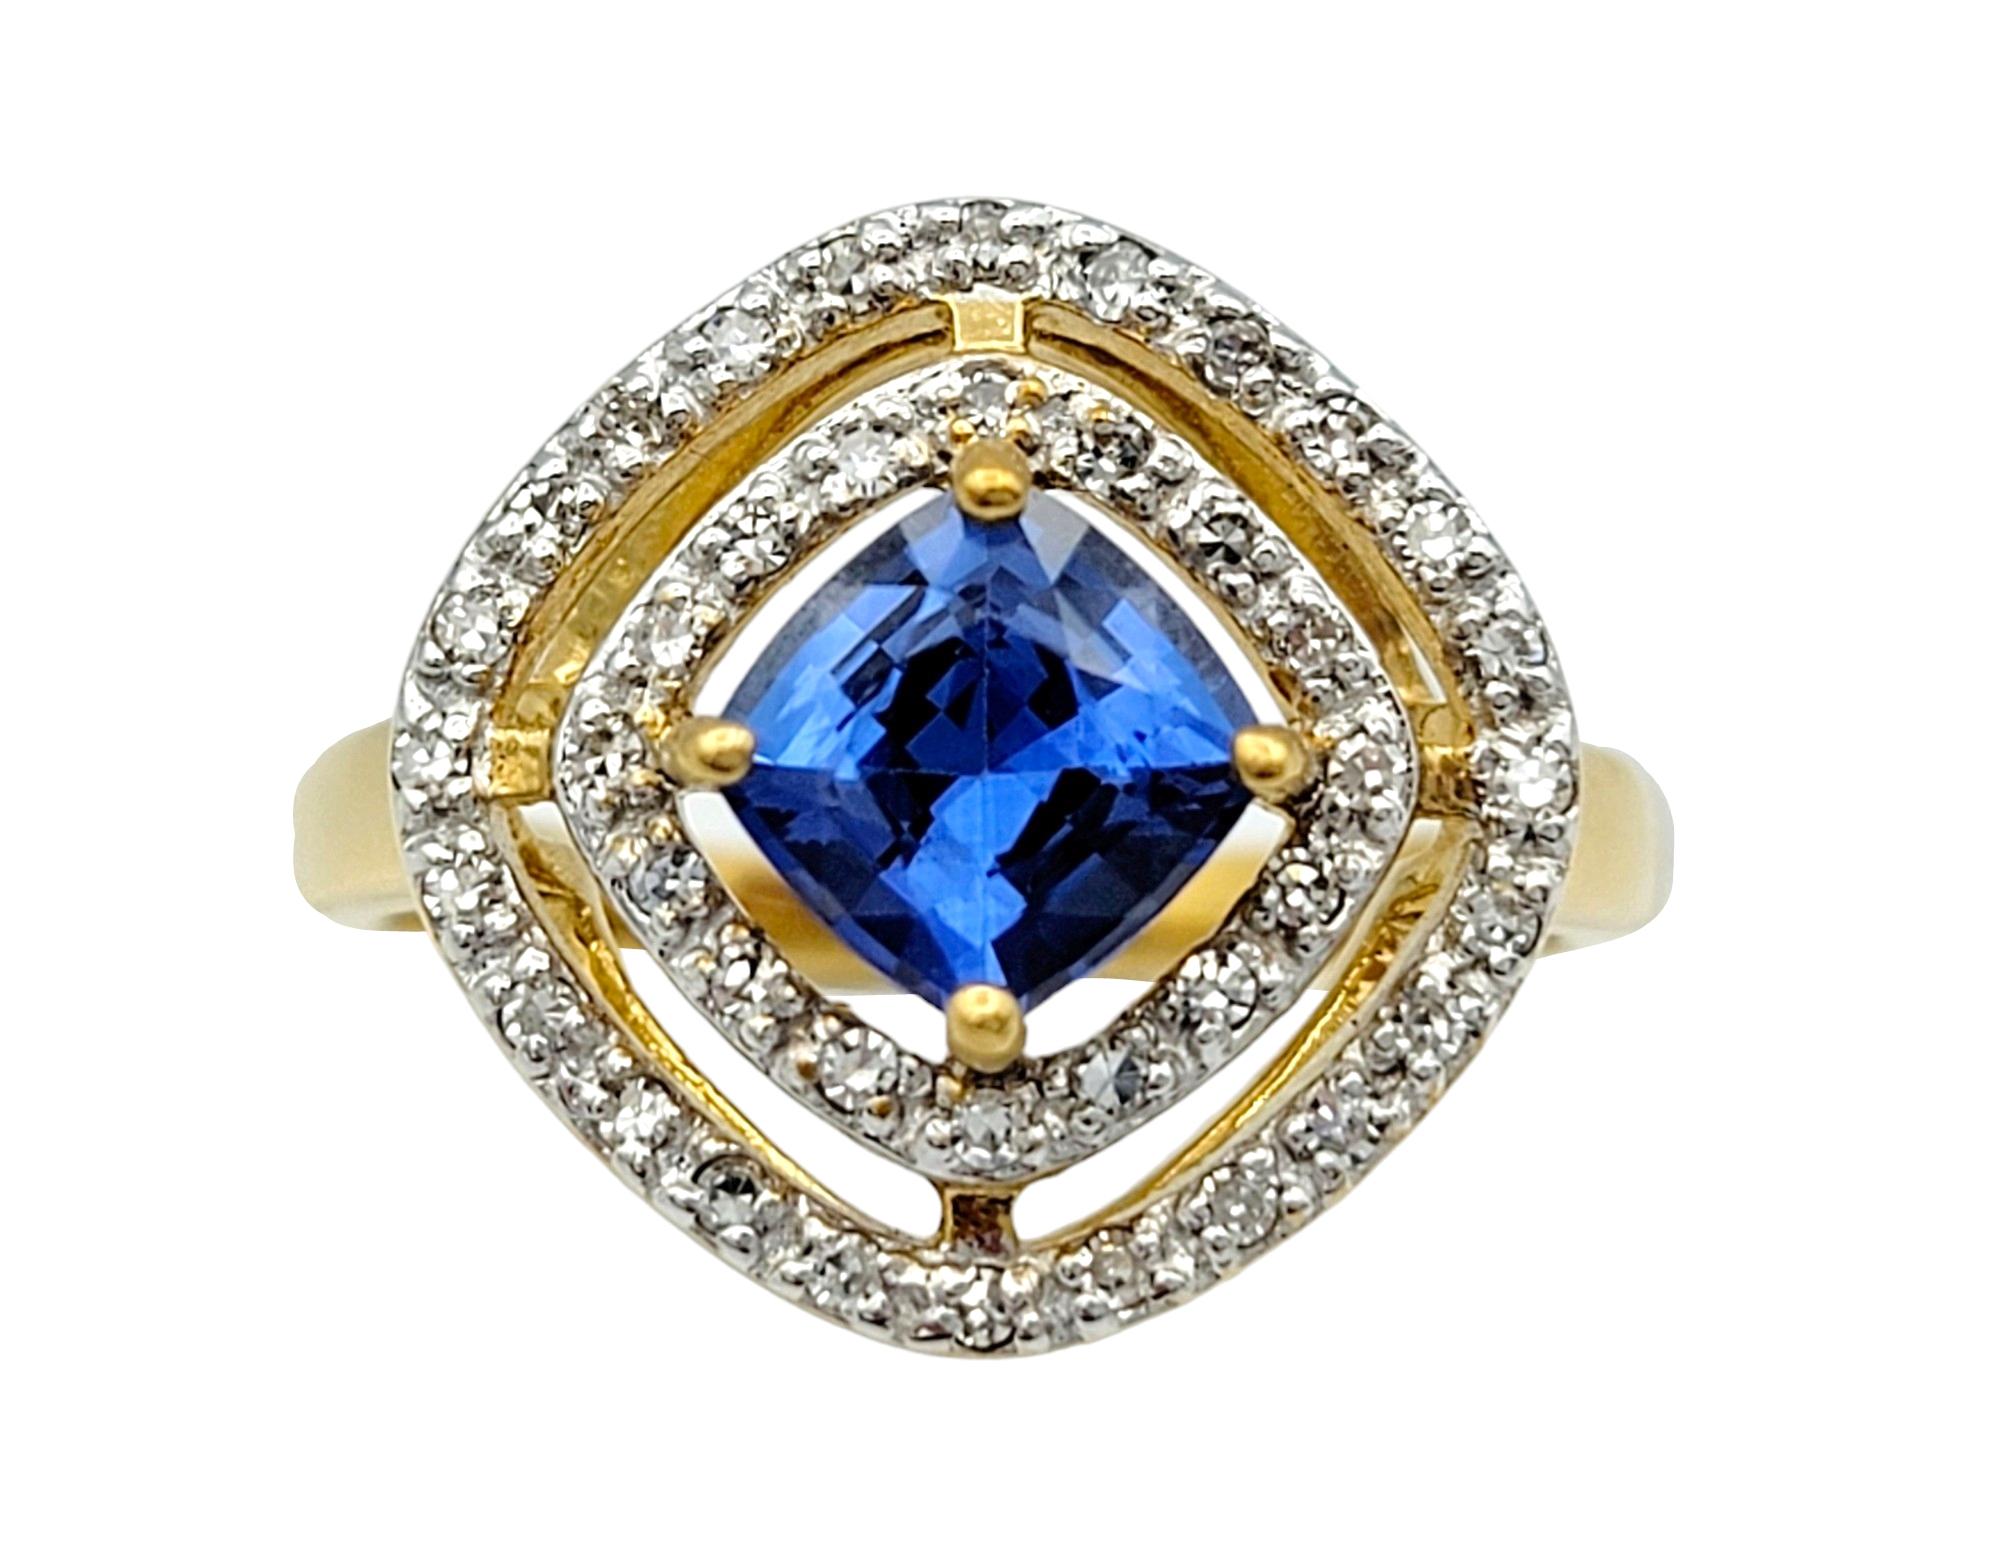 Ring Size: 7

This timeless sapphire and diamond ring is a captivating piece of jewelry set in lustrous 18 karat yellow gold. At its heart lies a magnificent cushion-cut sapphire, its deep and alluring hue drawing the eye with its enchanting beauty.